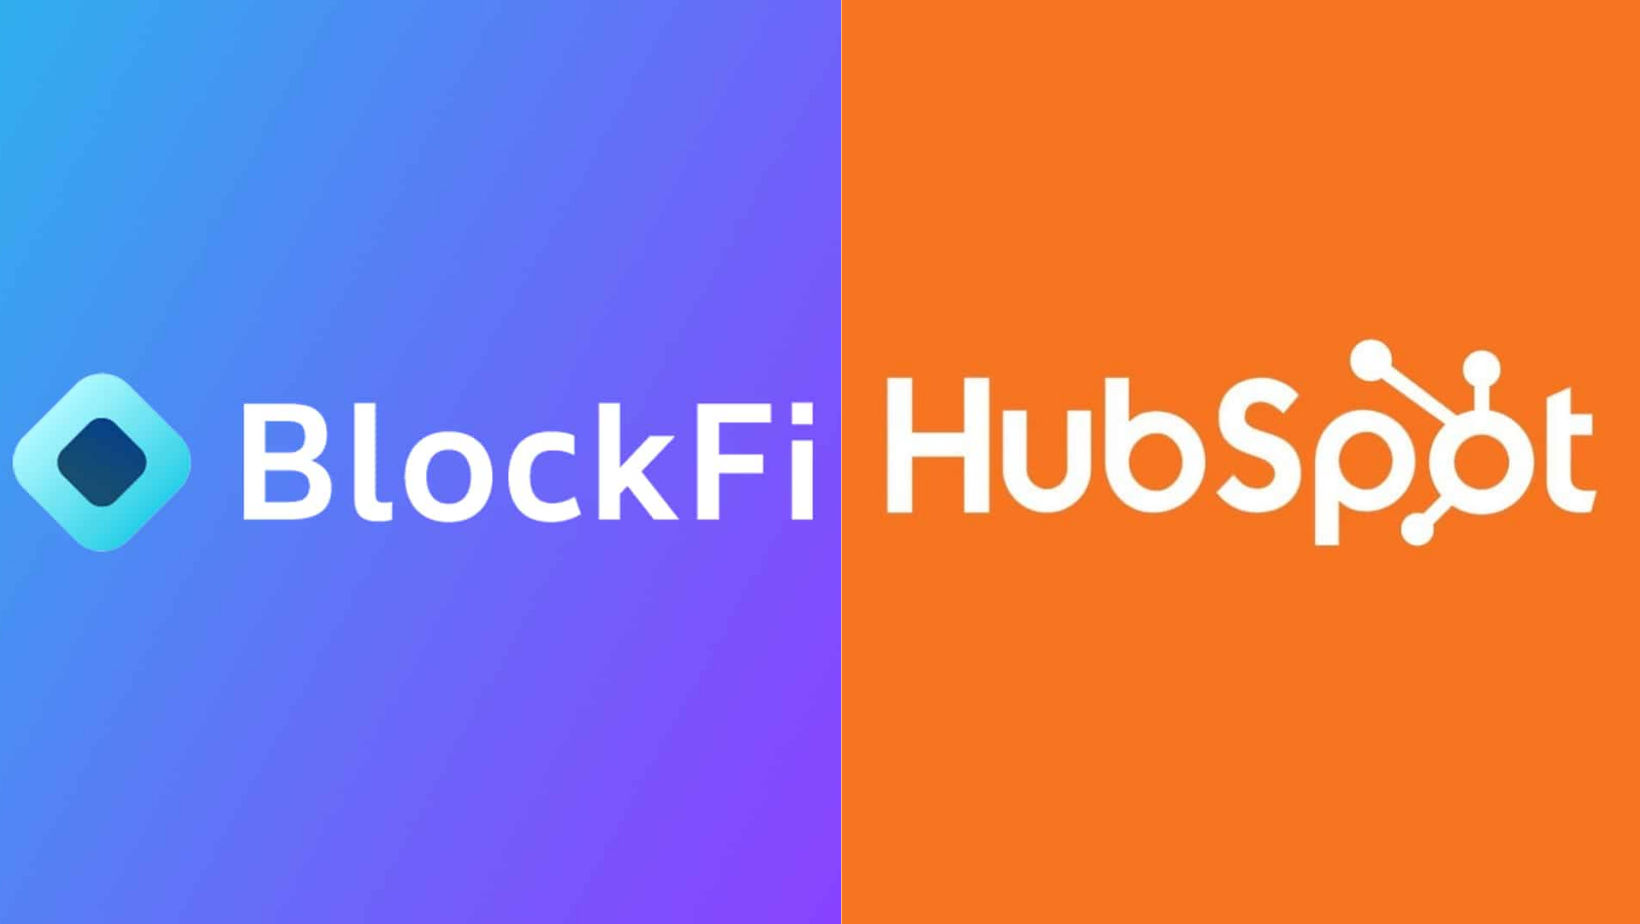 BlockFi confirms illegal access to Hubspot-hosted client data.